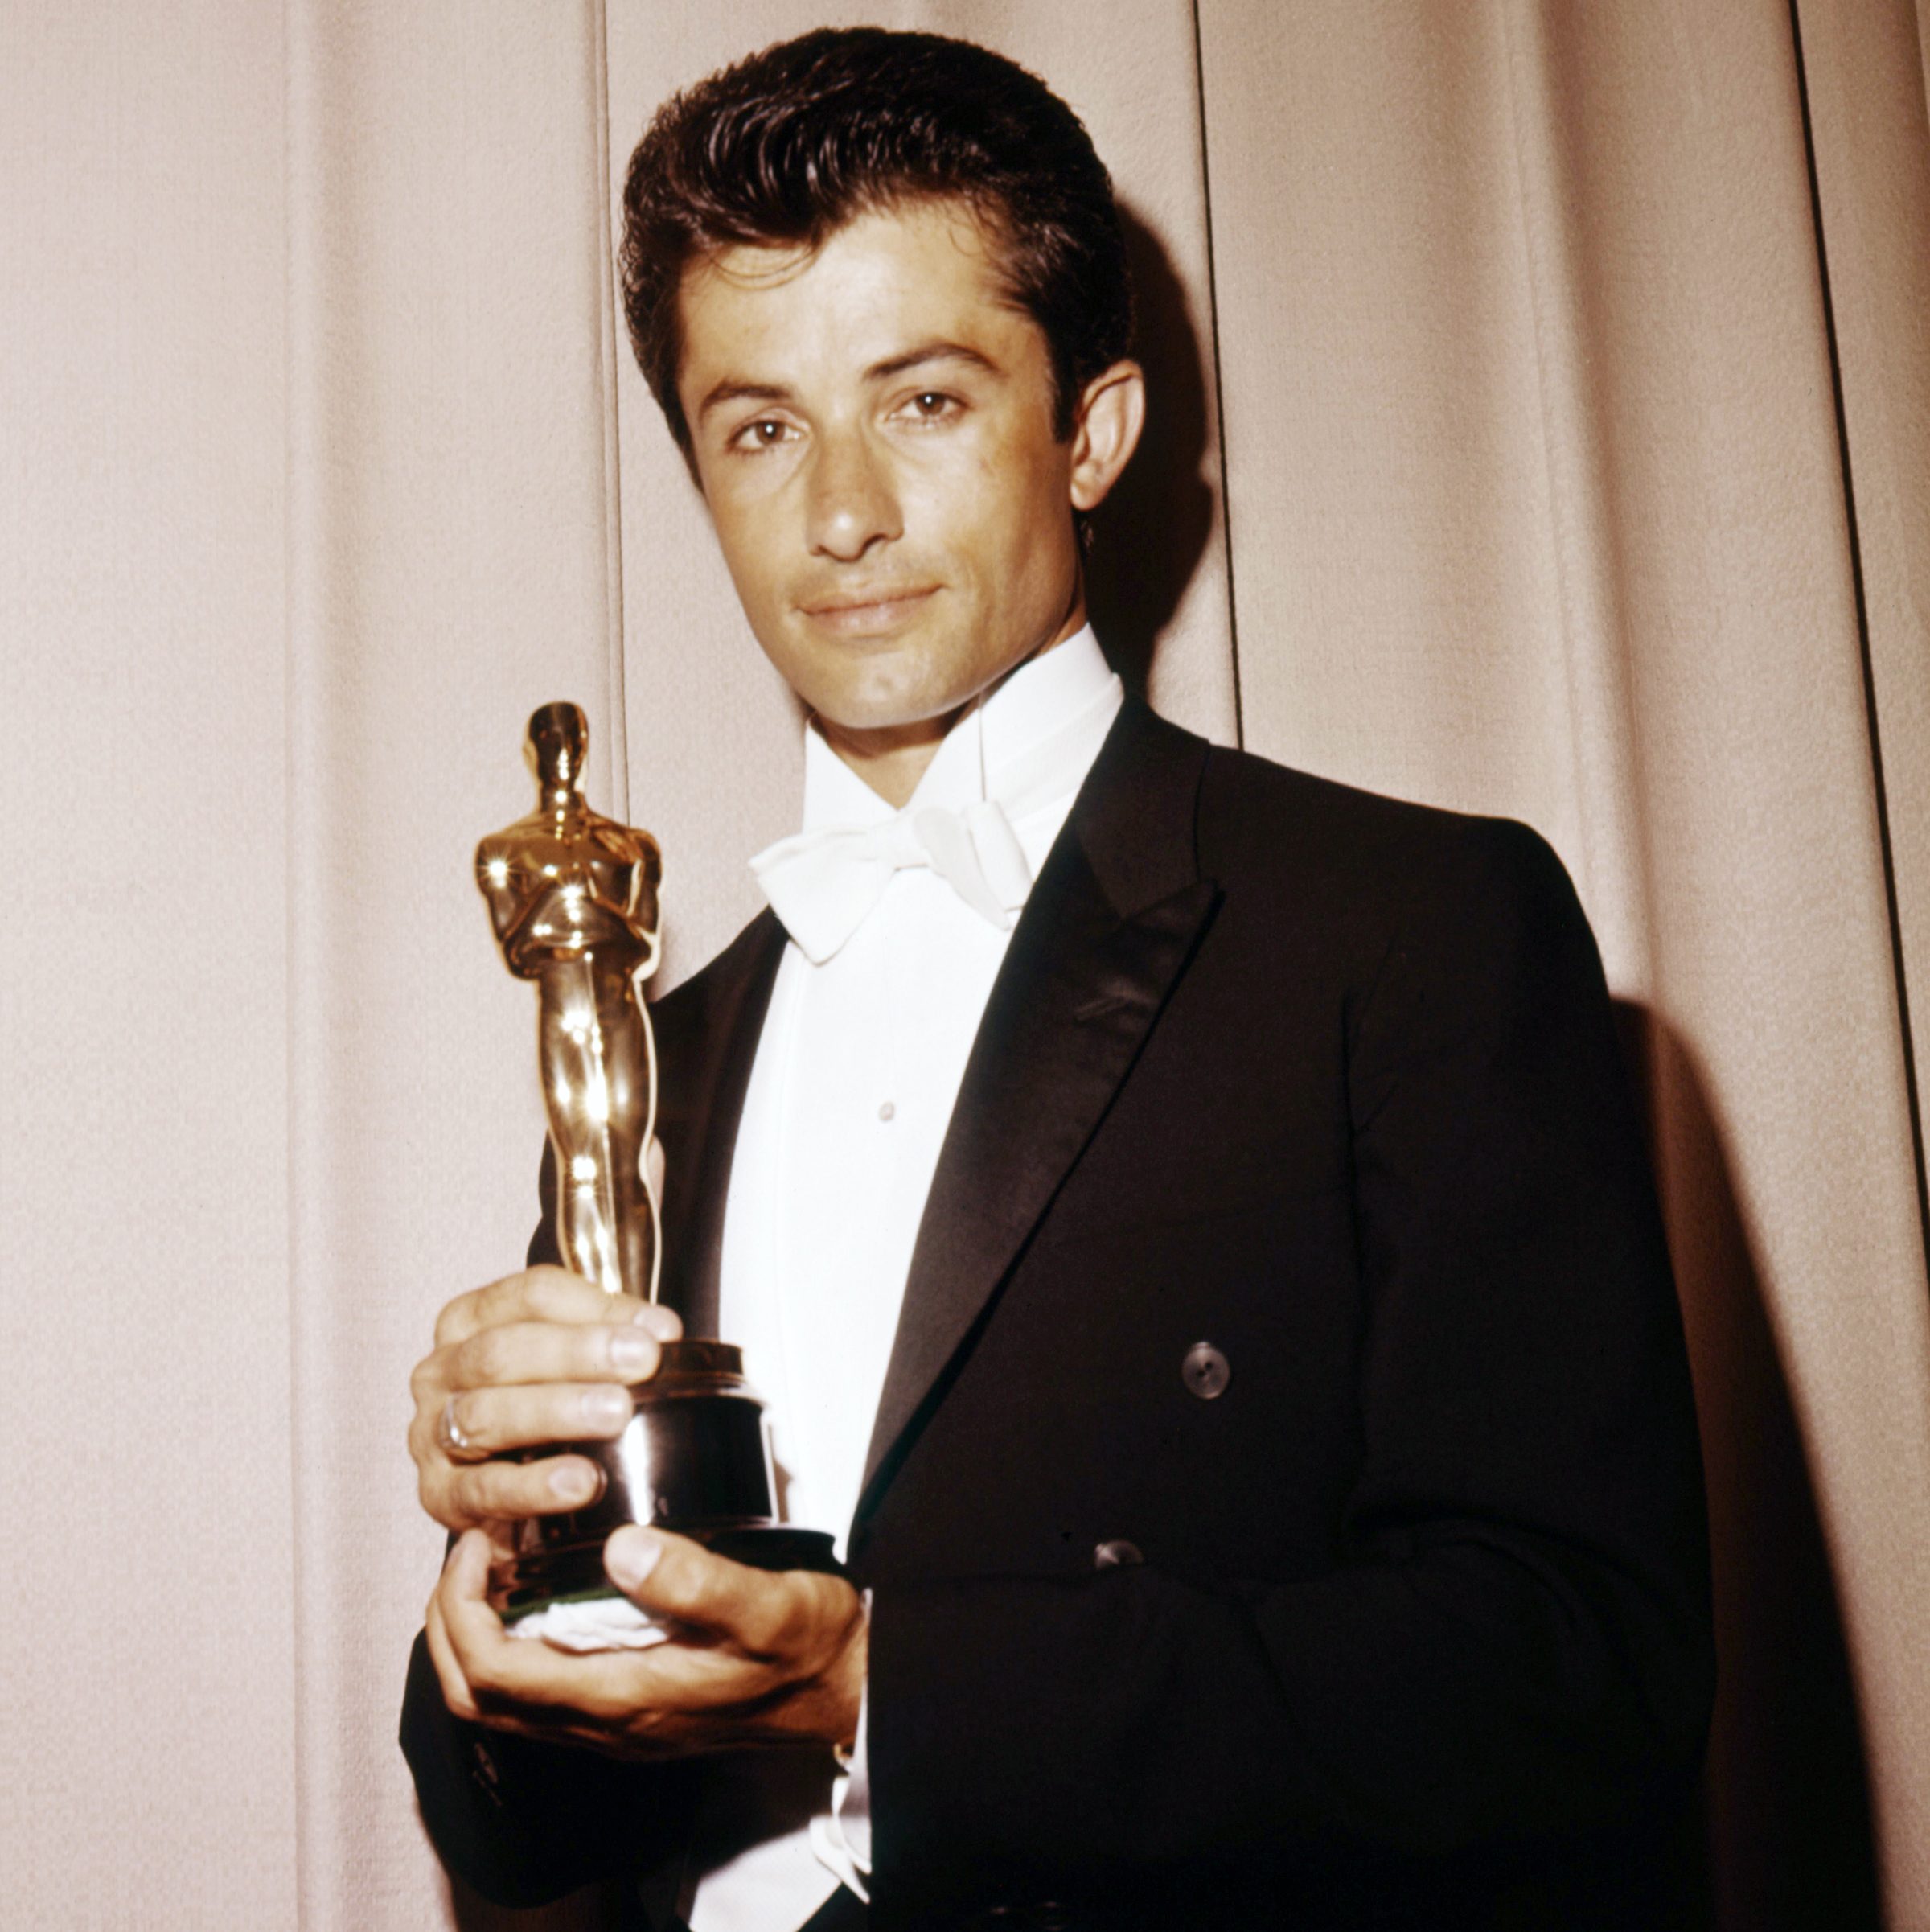 George Chakiris with his Oscar for Best Supporting Actor, 1962